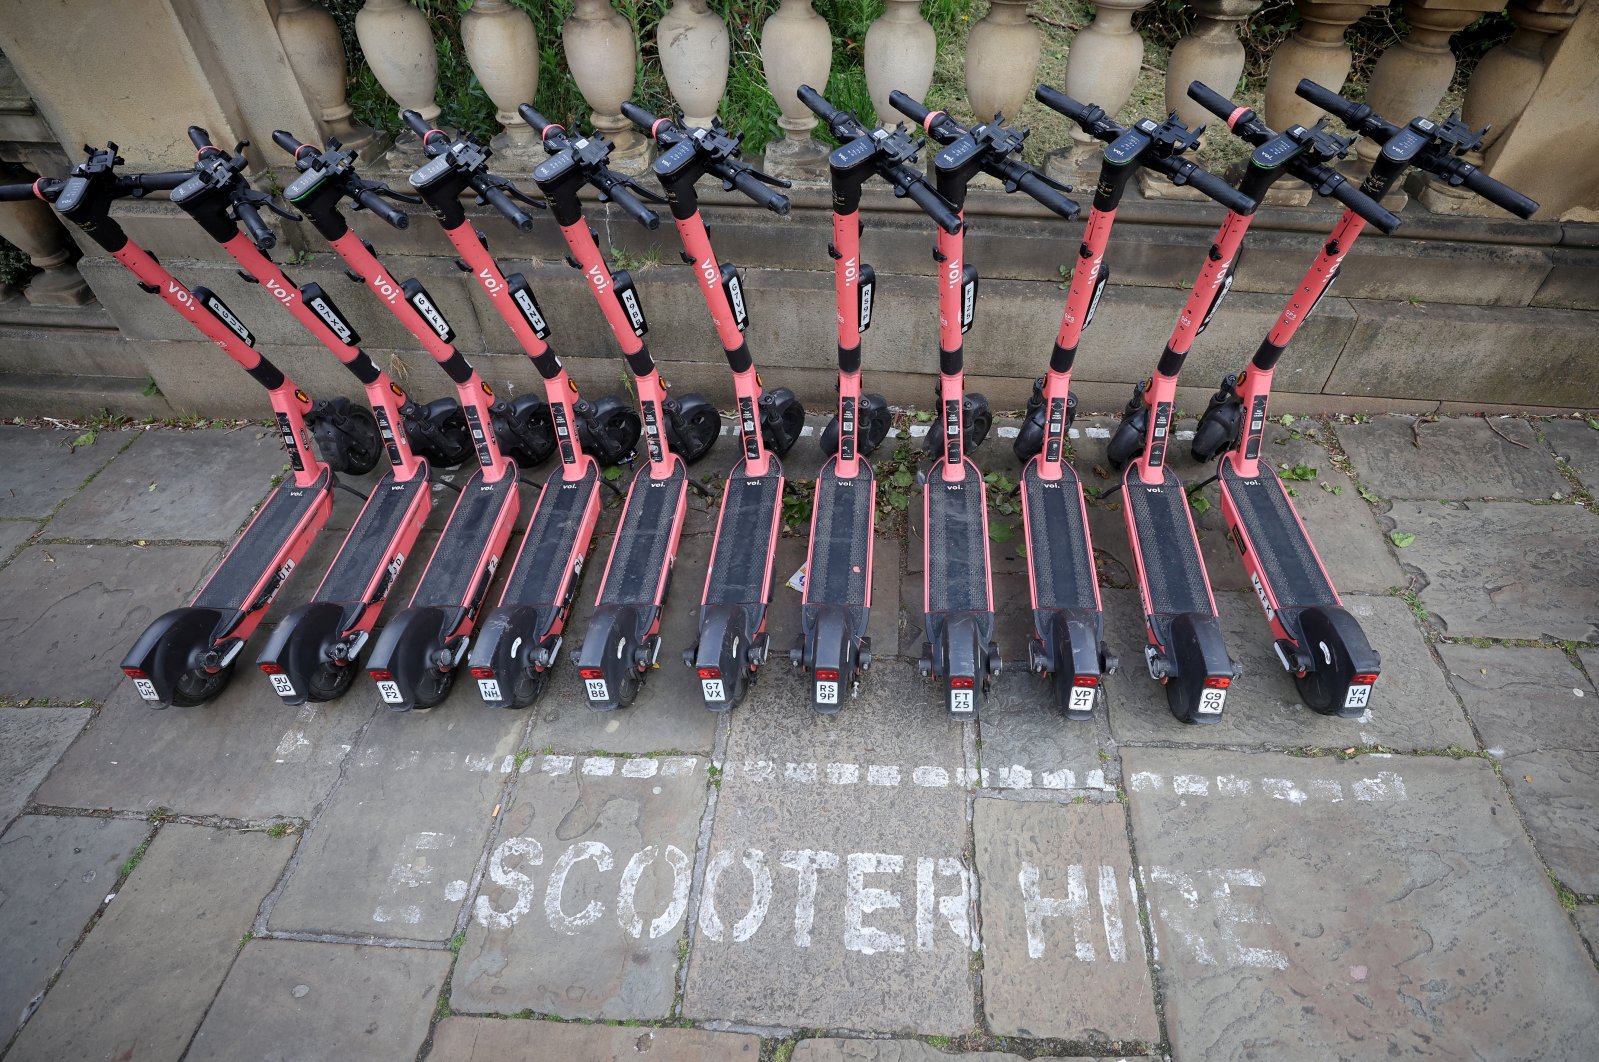 A row of Voi e-scooters is pictured in Liverpool, Britain, May 13, 2022. (Reuters Photo)